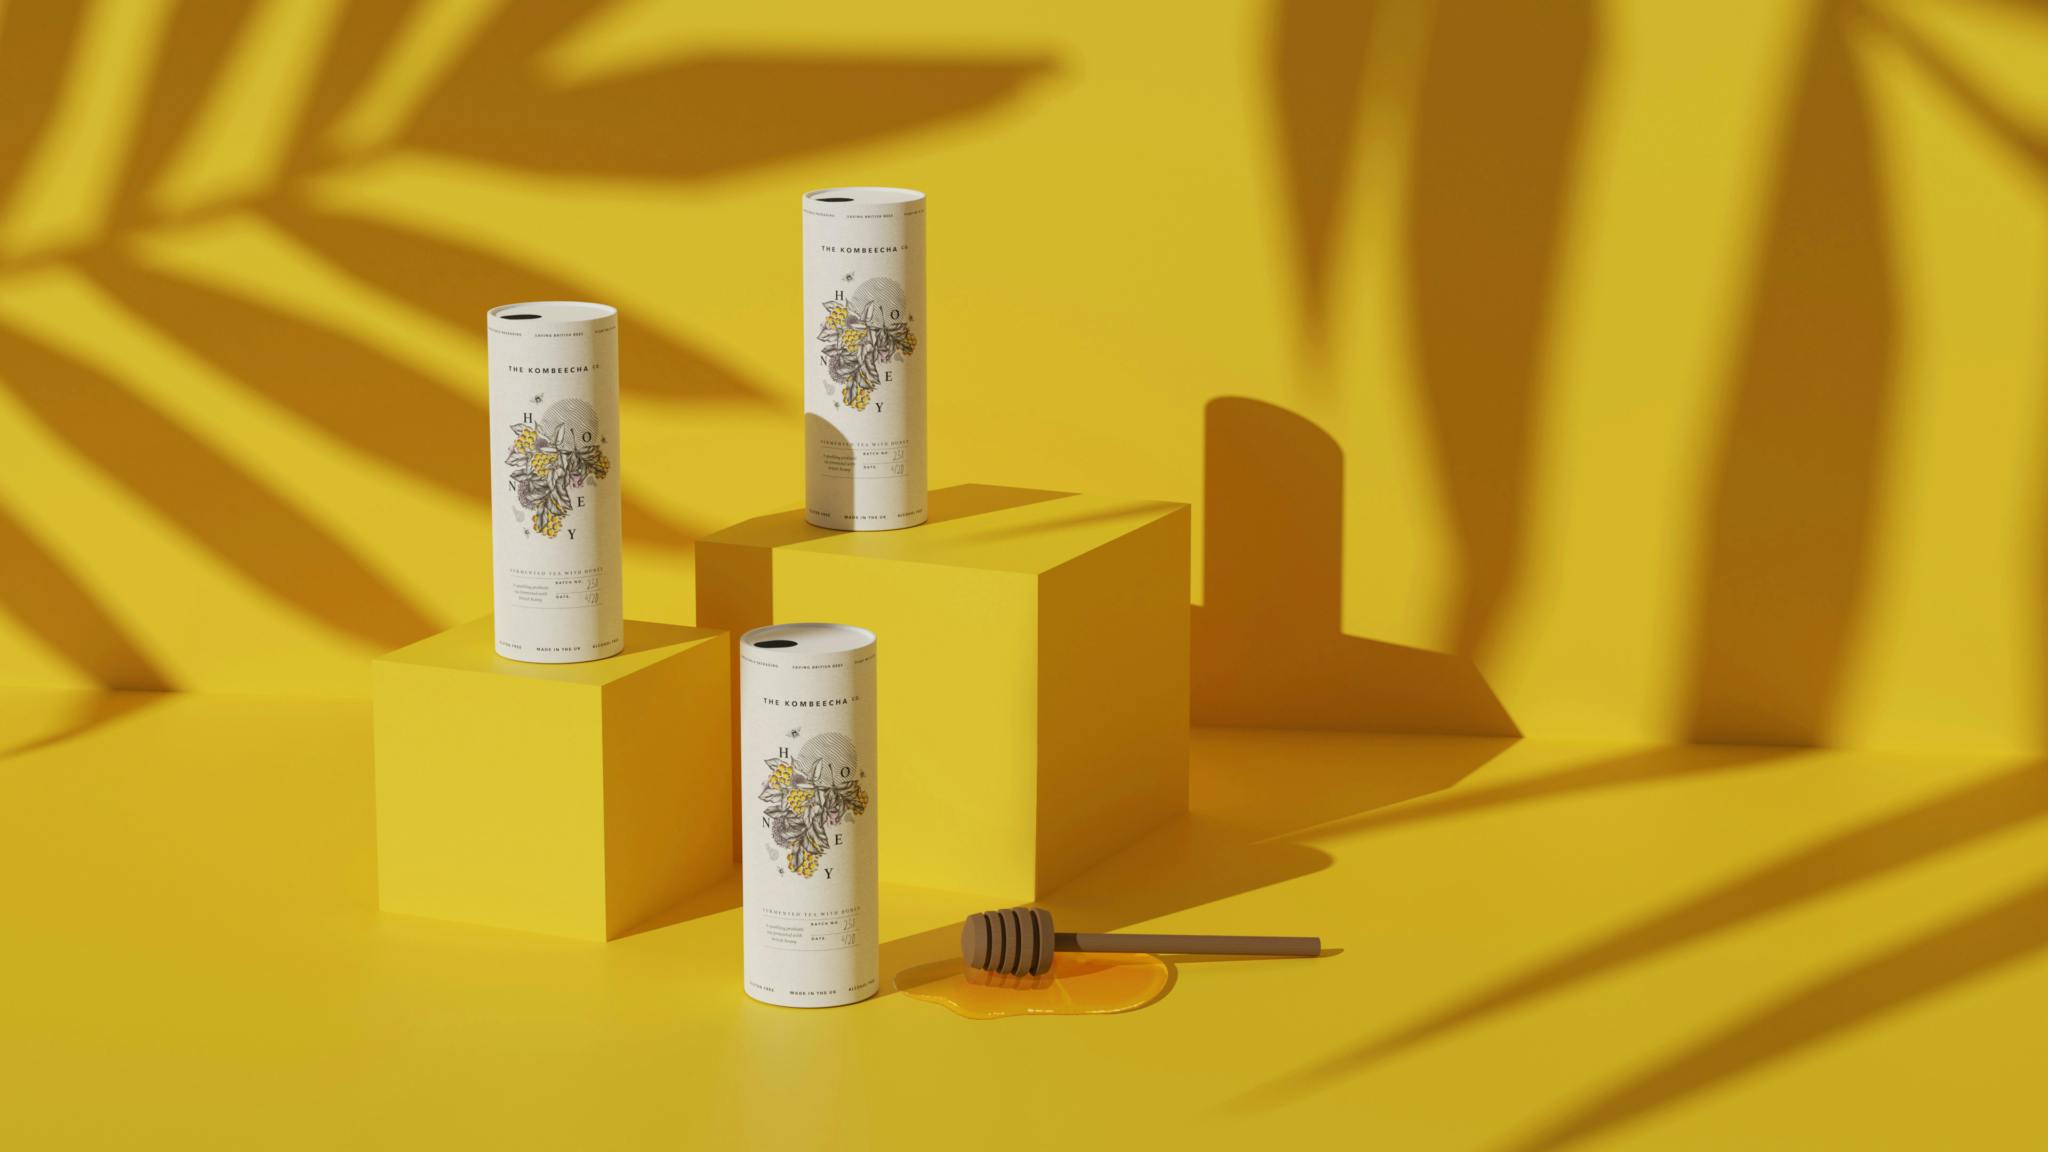 Image shows three kombucha drinks on mustard yellow boxes against a mustard yellow background with shadows of leaves, as well as a honey stirrer in the foreground. The drinks show the illustrated bee branding.